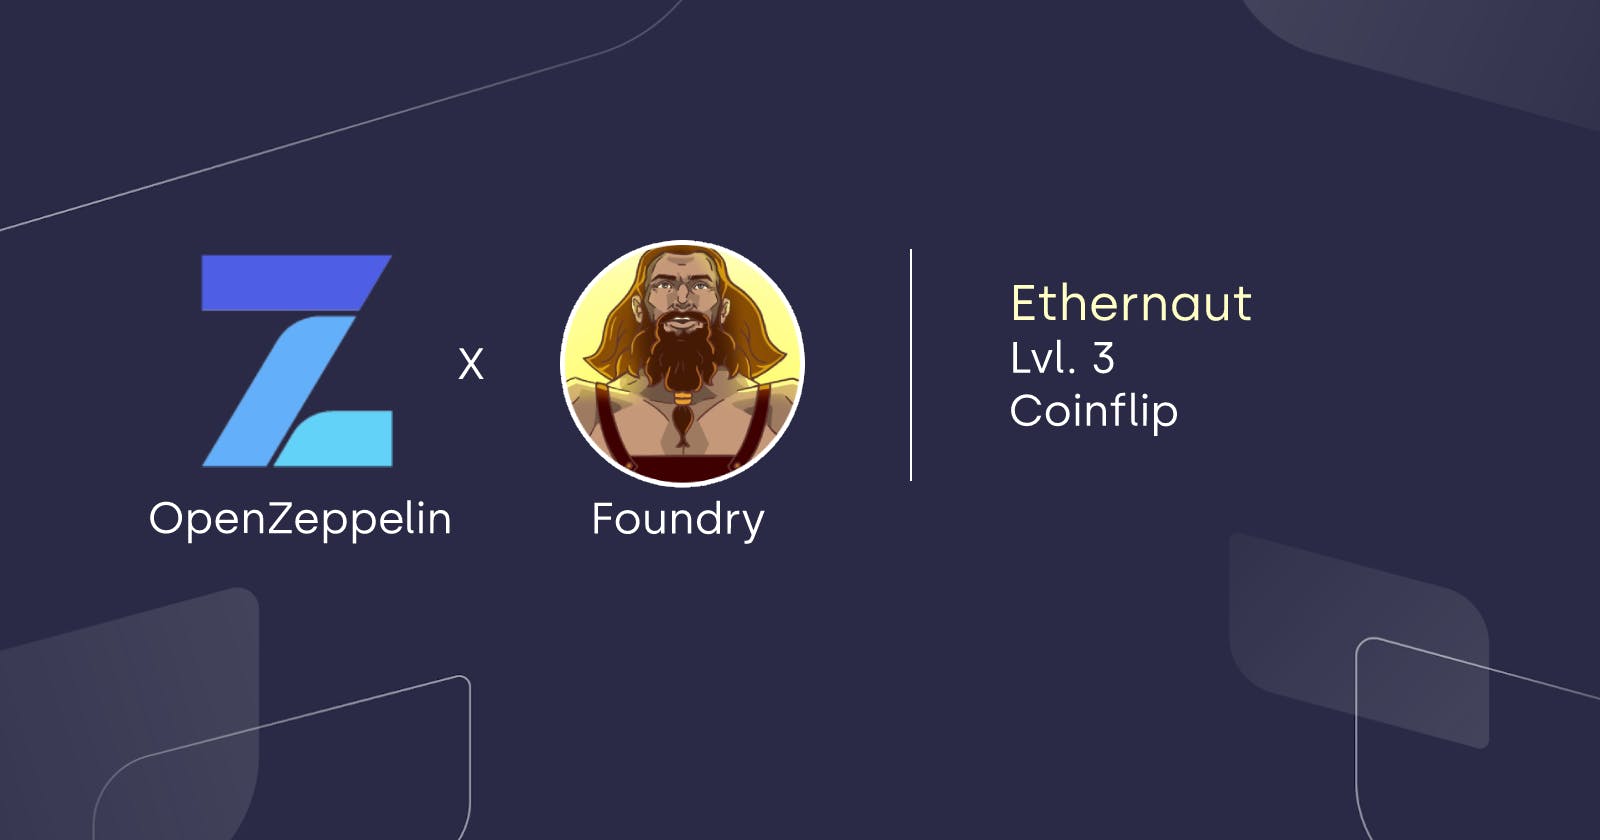 Ethereum x Foundry - 0x3 Coinflip